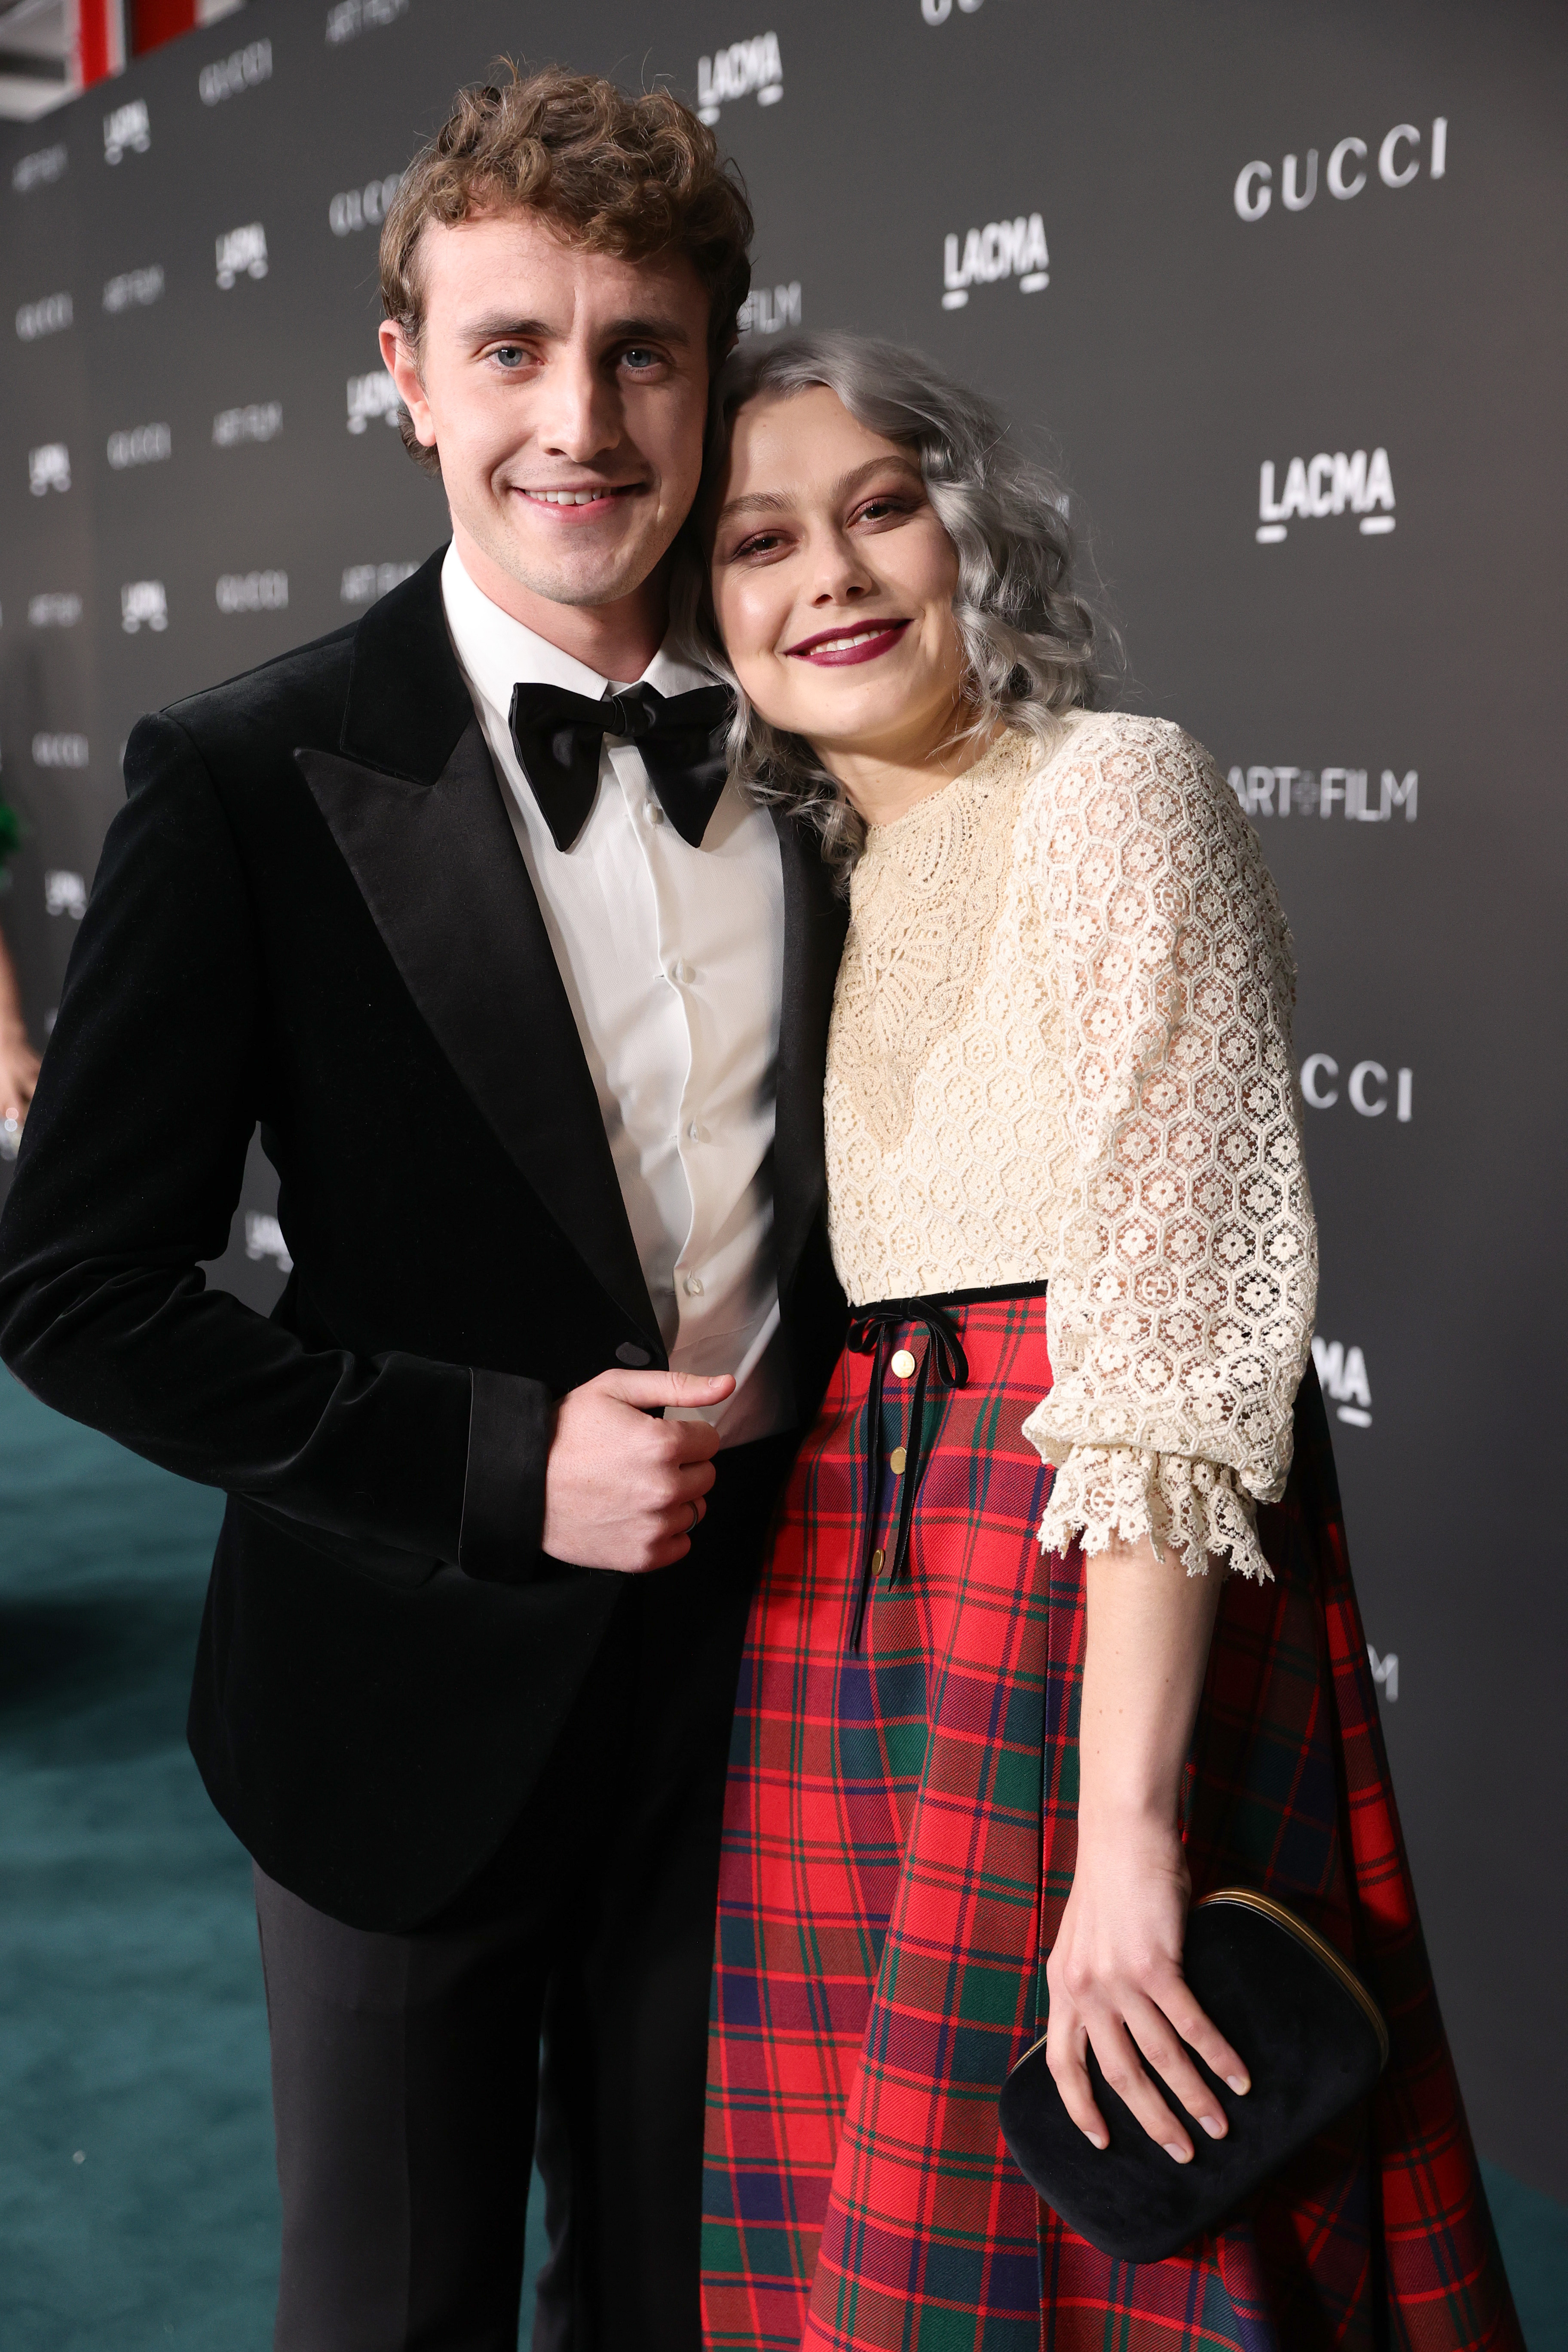 Paul Mescal, wearing Gucci, and Phoebe Bridgers, wearing Gucci, attend the 10th Annual LACMA ART+FILM GALA honoring Amy Sherald, Kehinde Wiley, and Steven Spielberg presented by Gucci at Los Angeles County Museum of Art on November 06, 2021 in Los Angeles, California. 